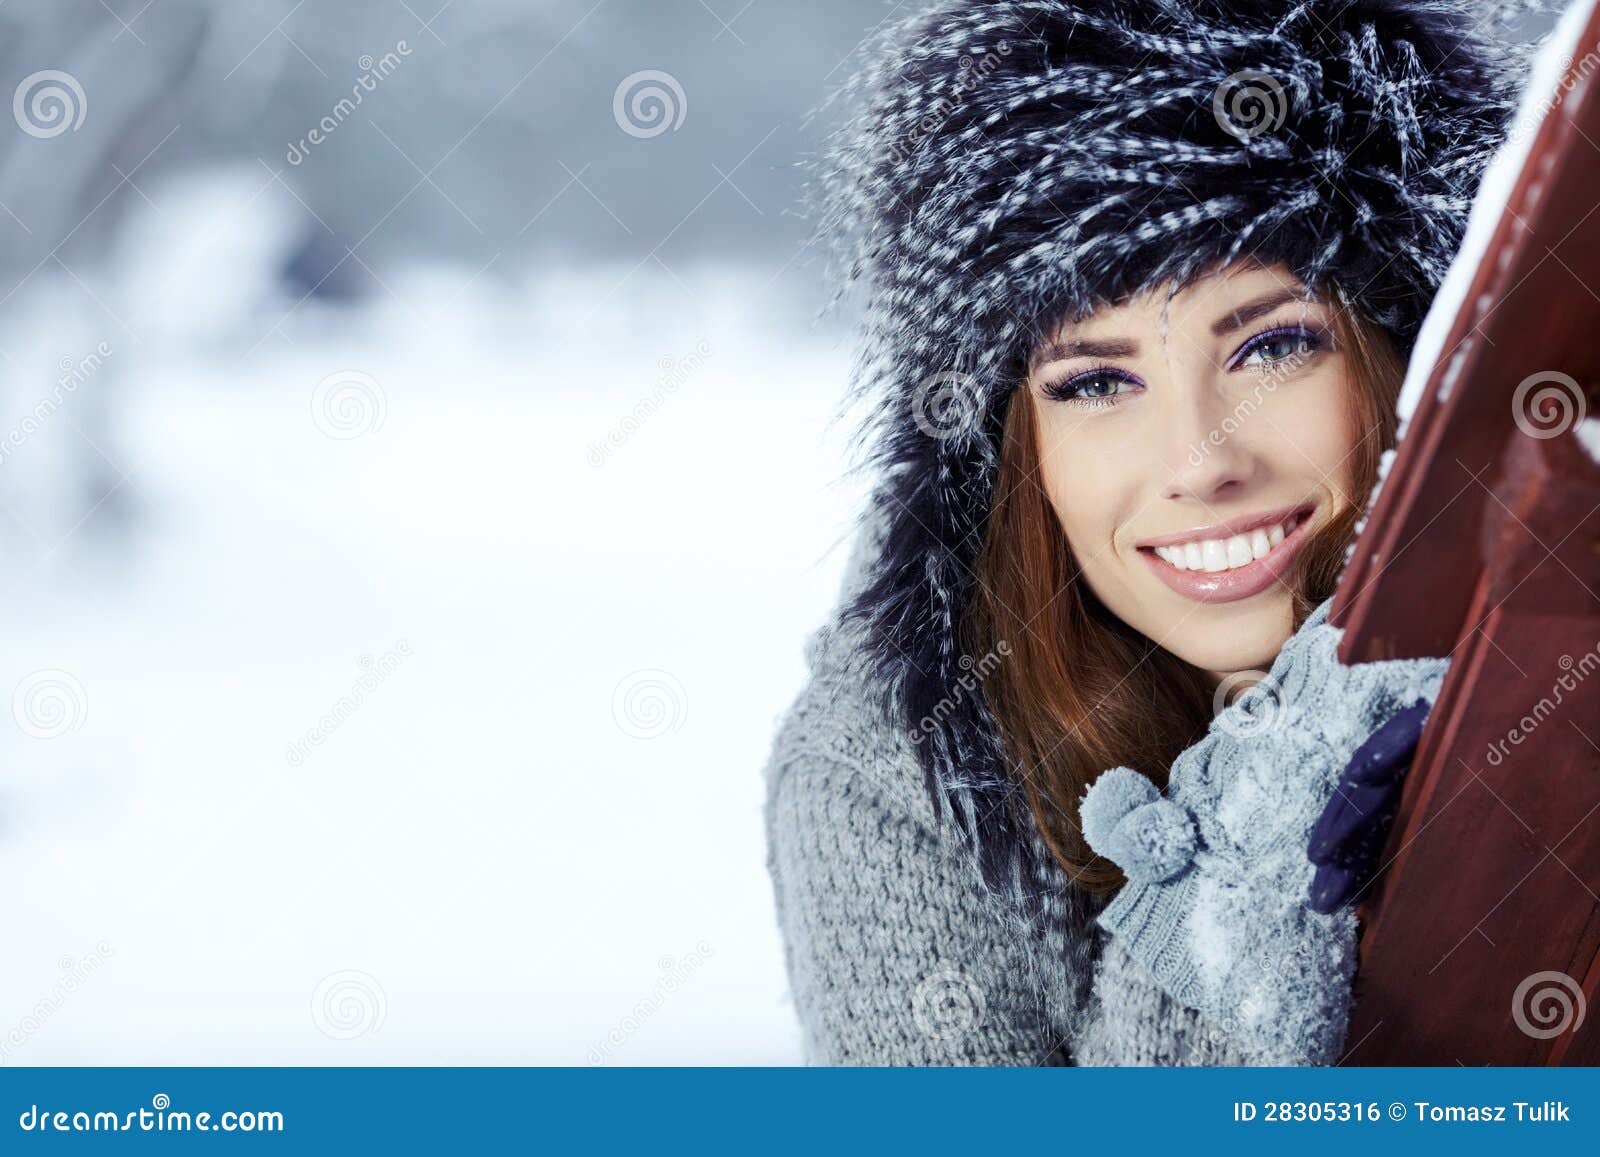 Brunette Girl I Winter Clothes Stock Photo - Image of funny, blue: 28305316